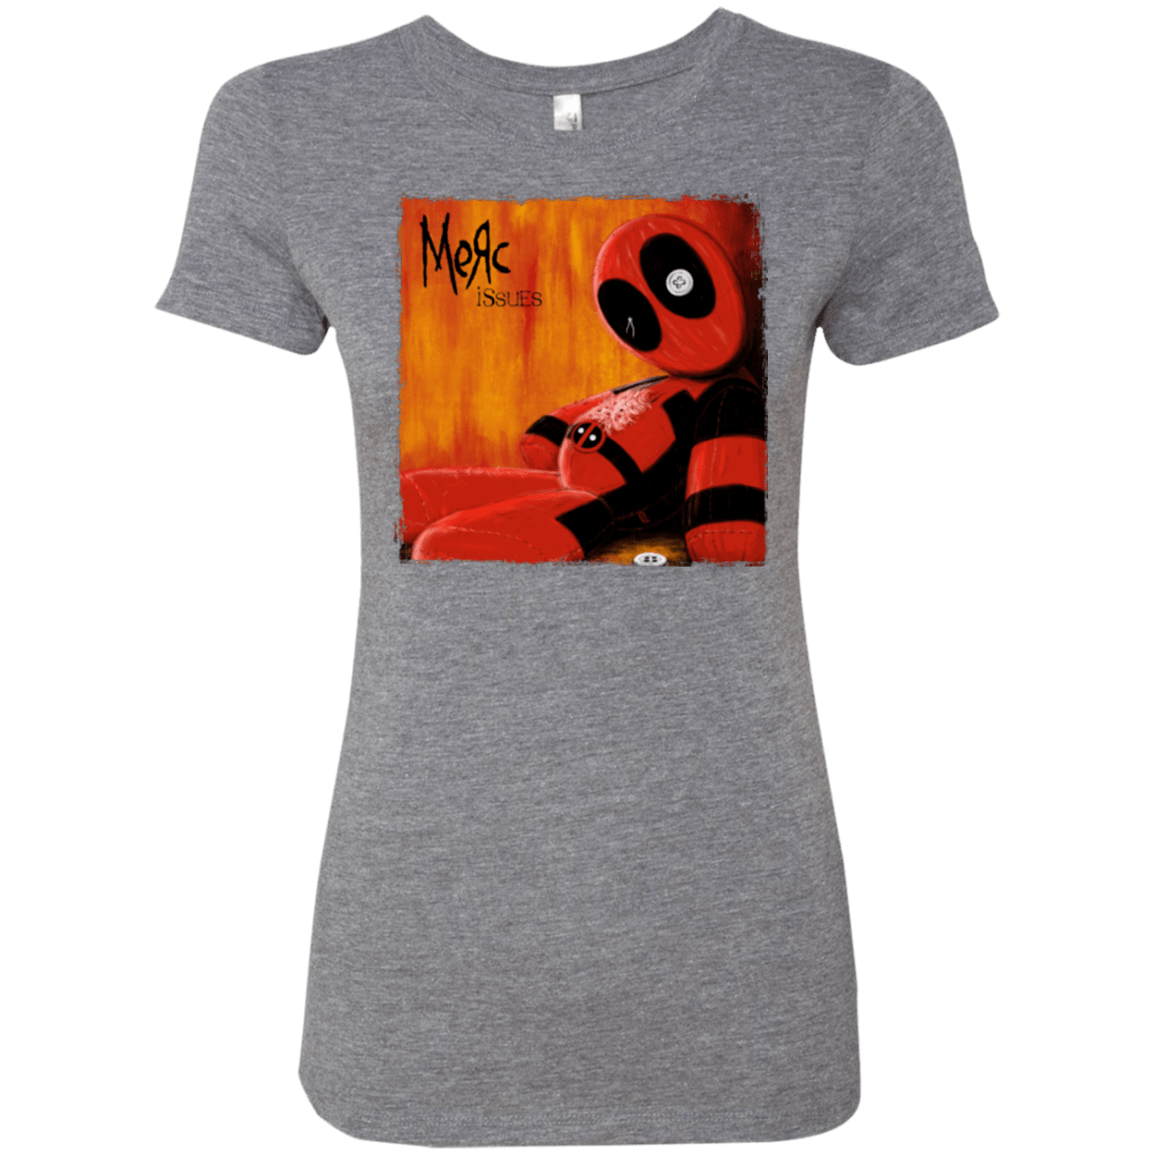 T-Shirts Premium Heather / Small Issues Women's Triblend T-Shirt